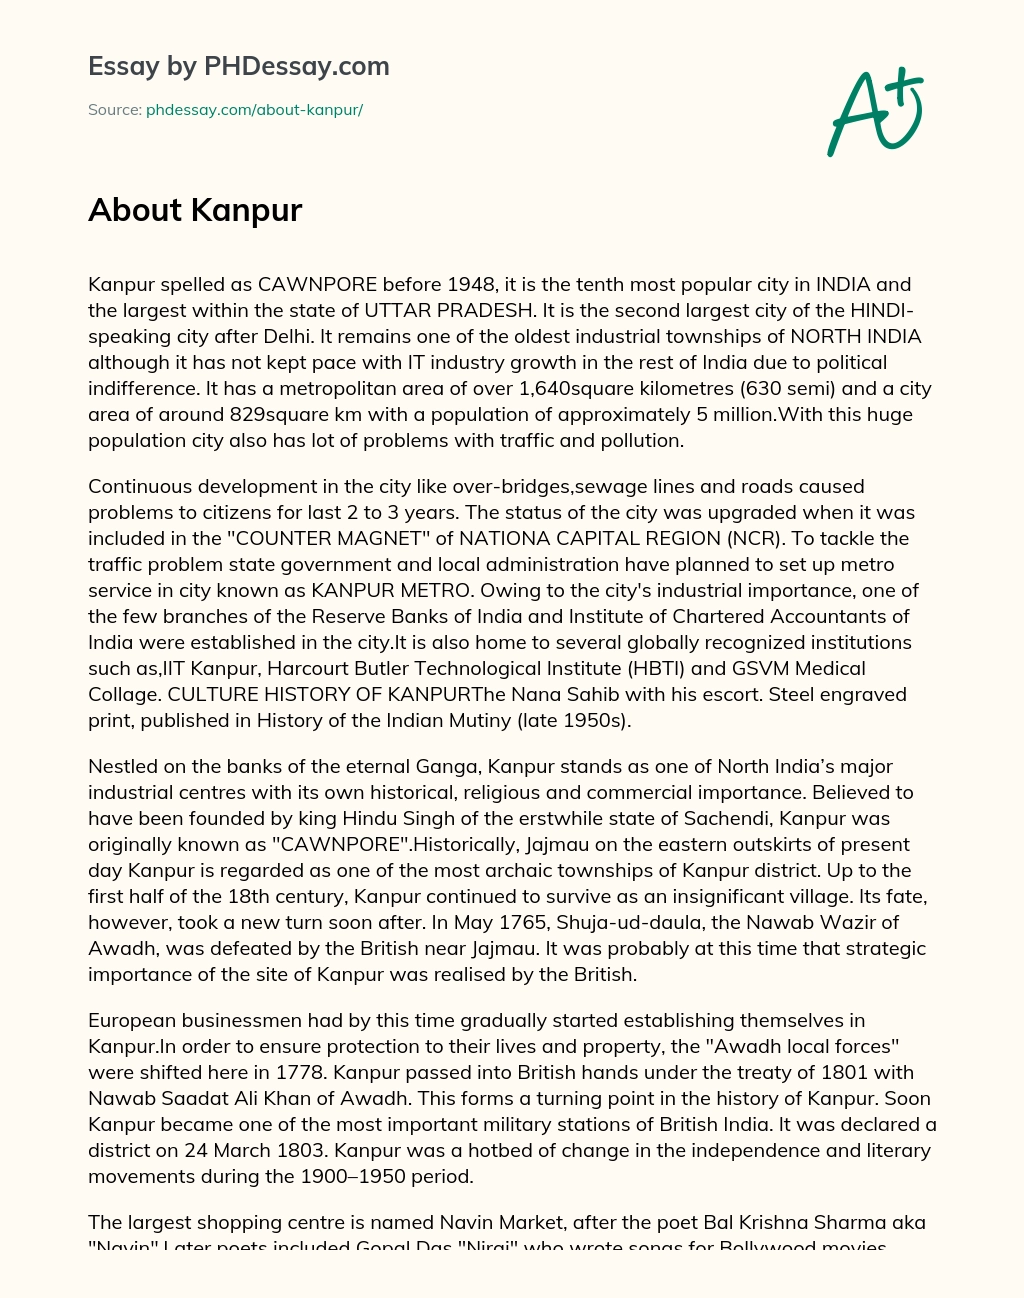 Kanpur: A City of Industrial Importance and Growing Pains essay